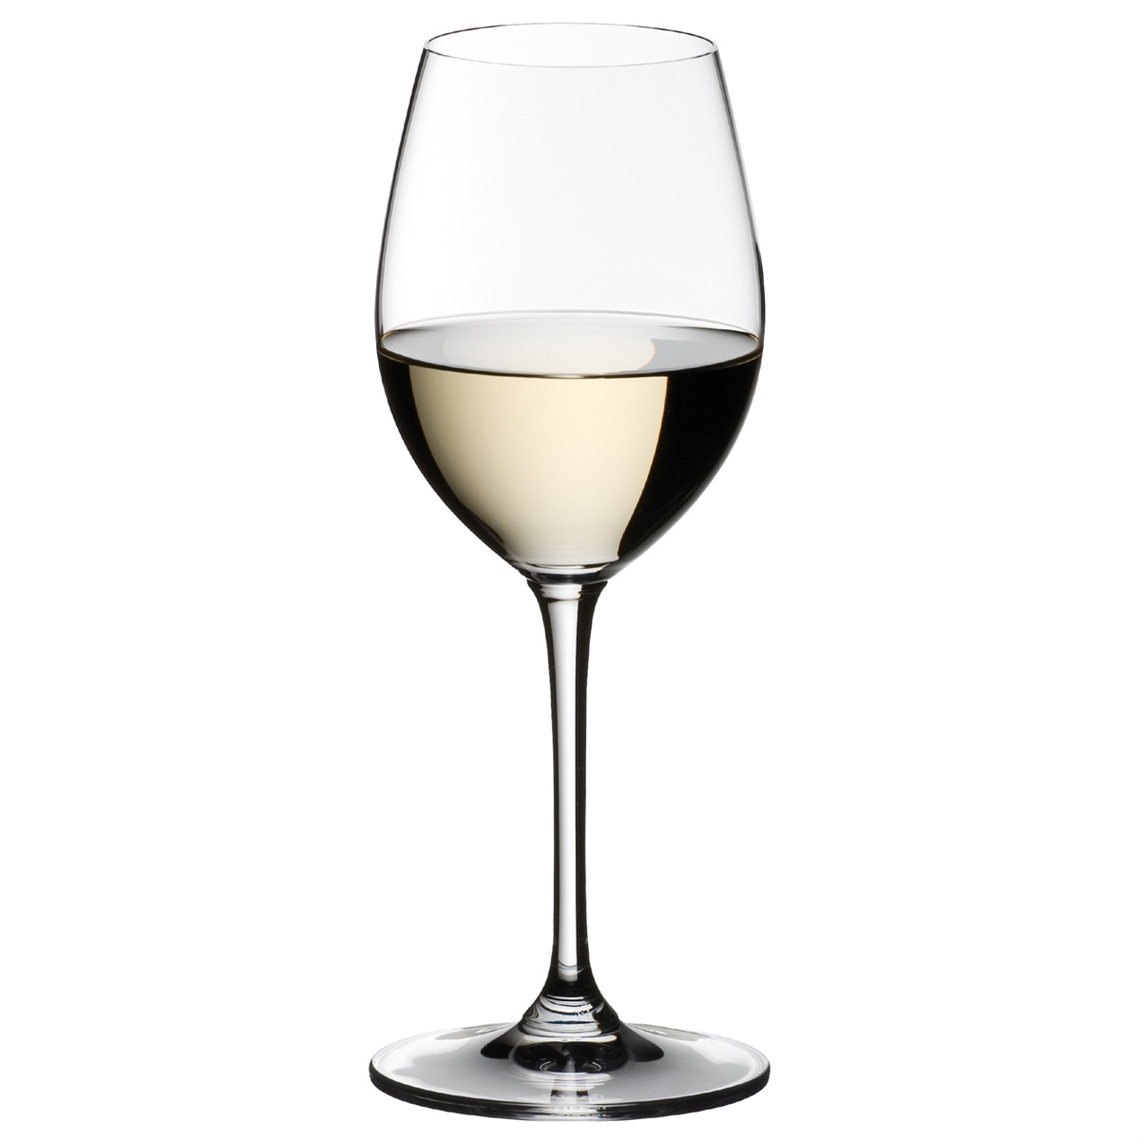 View more new york bar from our Dessert Wine Glasses range